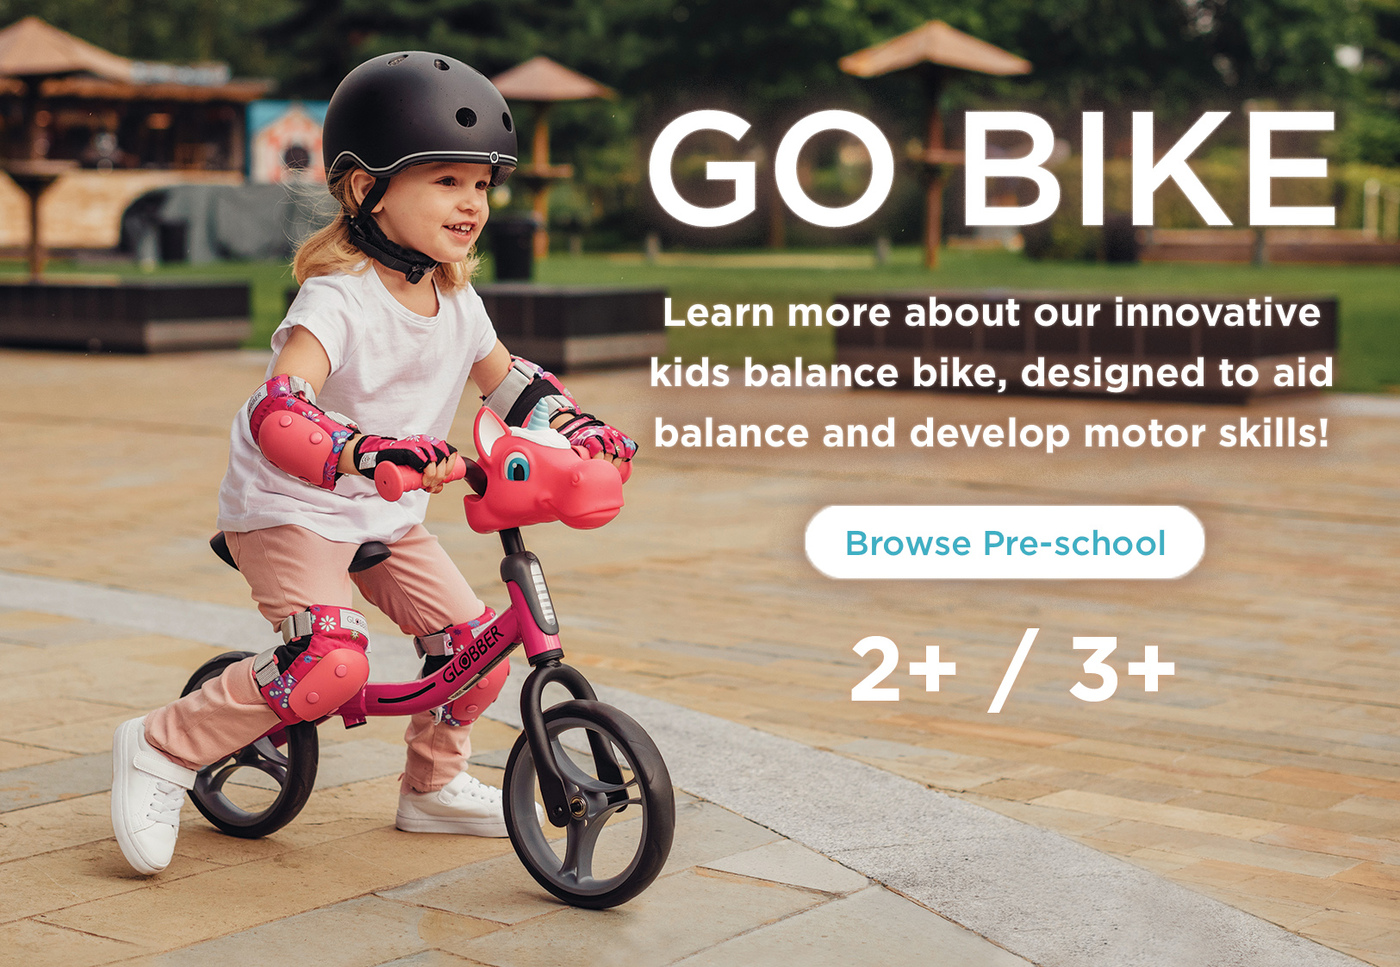 Learn more about our innovative kids balance bike, designed to aid balance and develop motor skills!